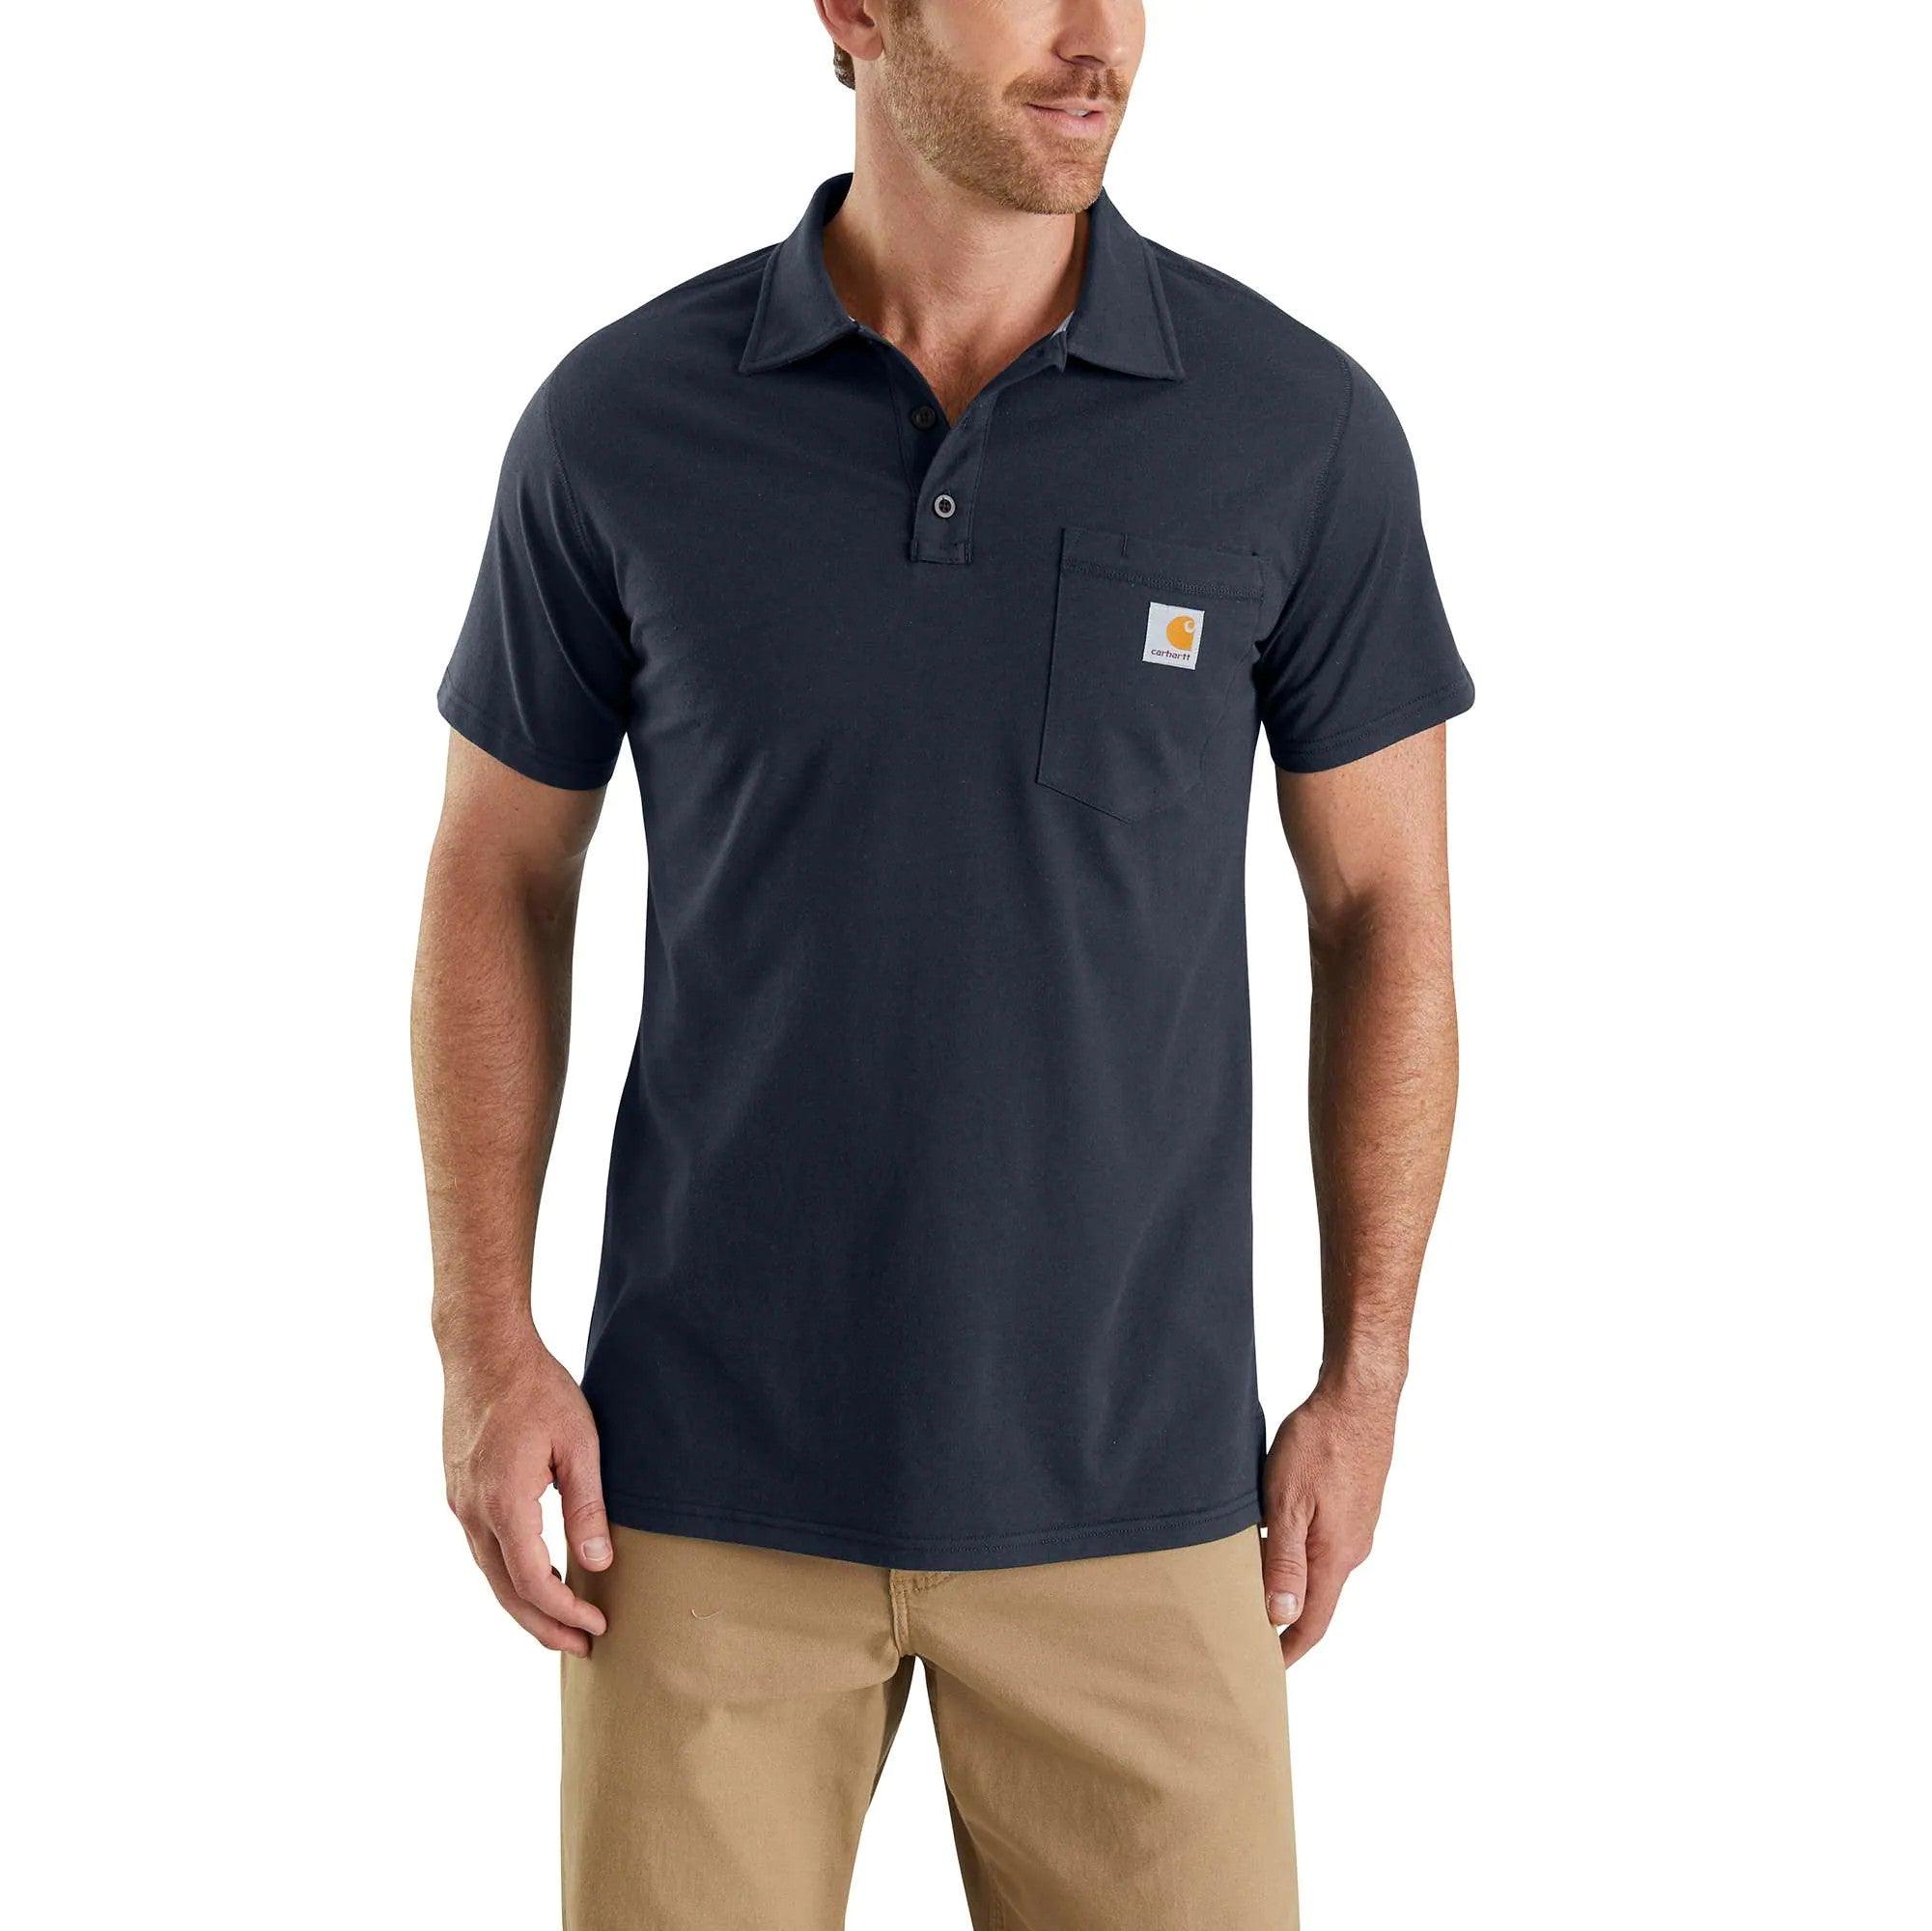 Force Cotton Pocket Polo Shirt - Cinder - Purpose-Built / Home of the Trades